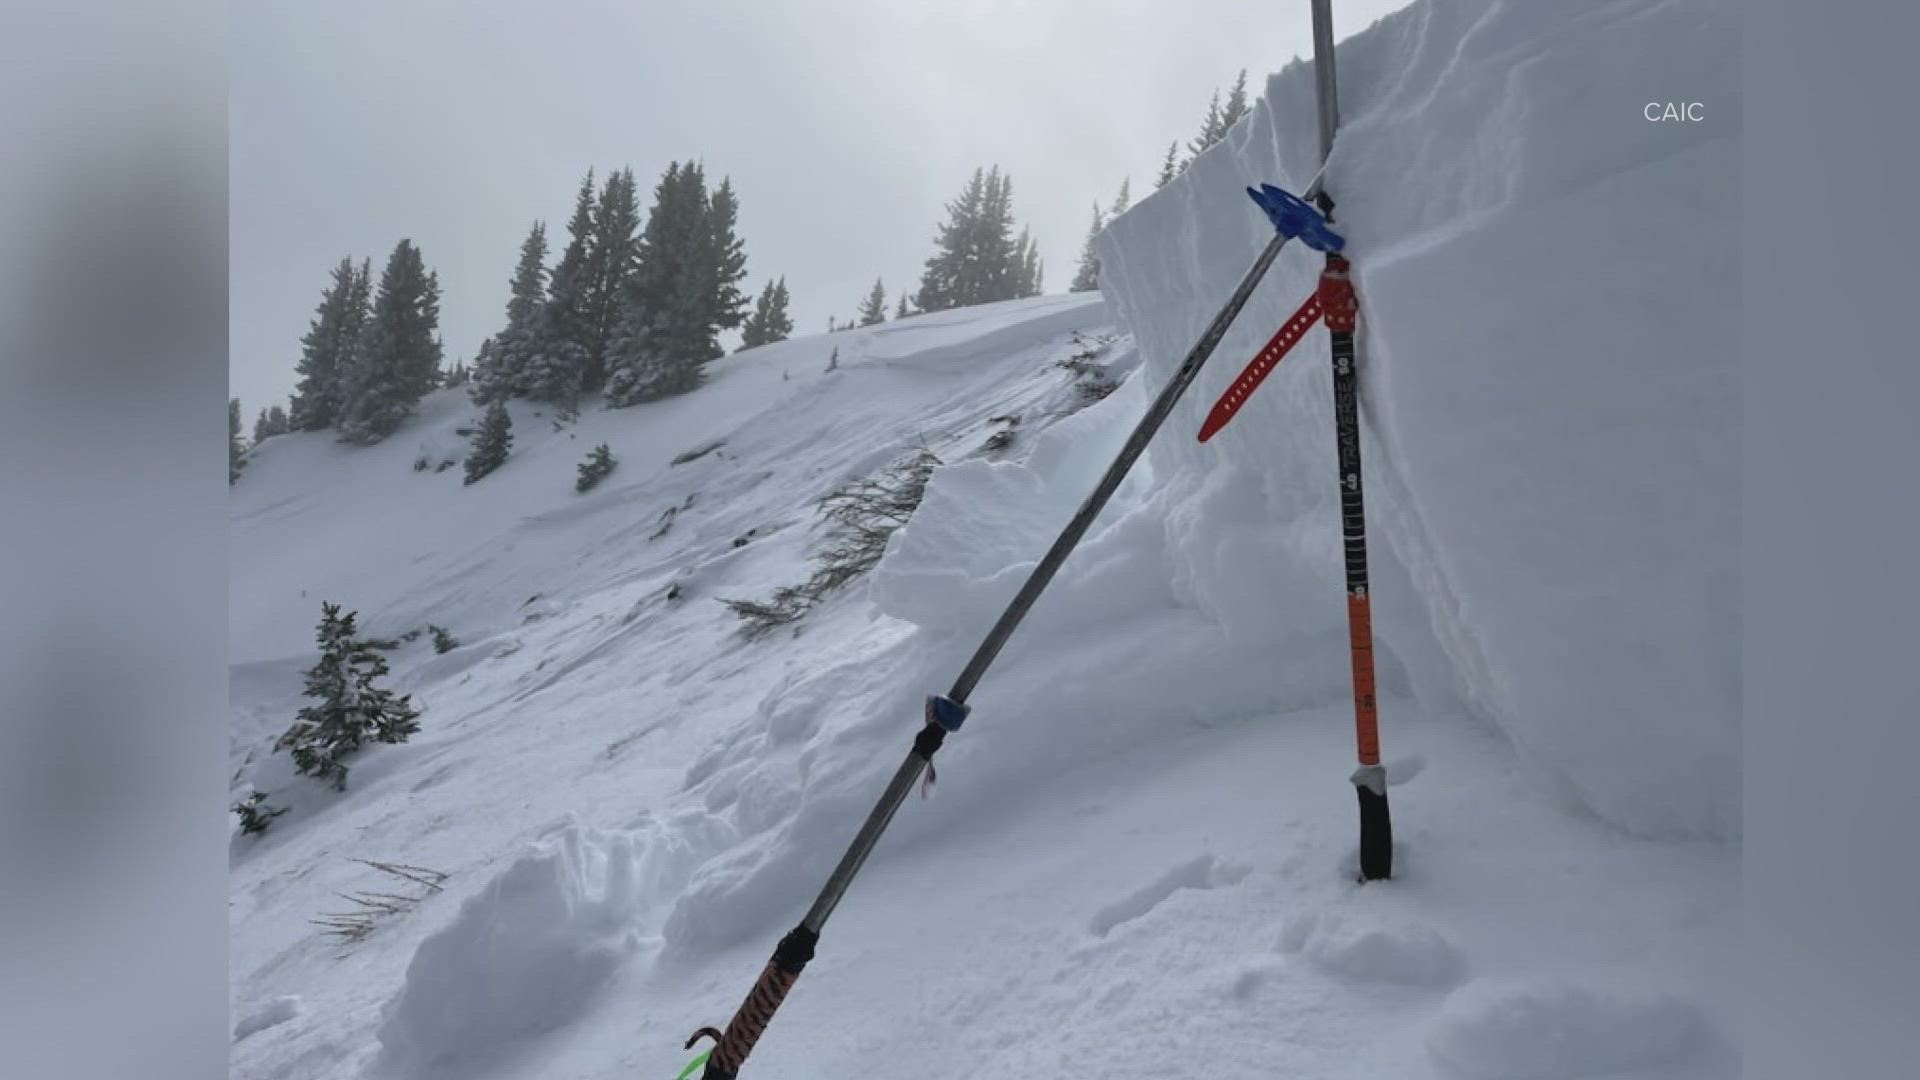 The Colorado Avalanche Information Center is warning backcountry goers to stay safe as the state enters a period of dangerous conditions.